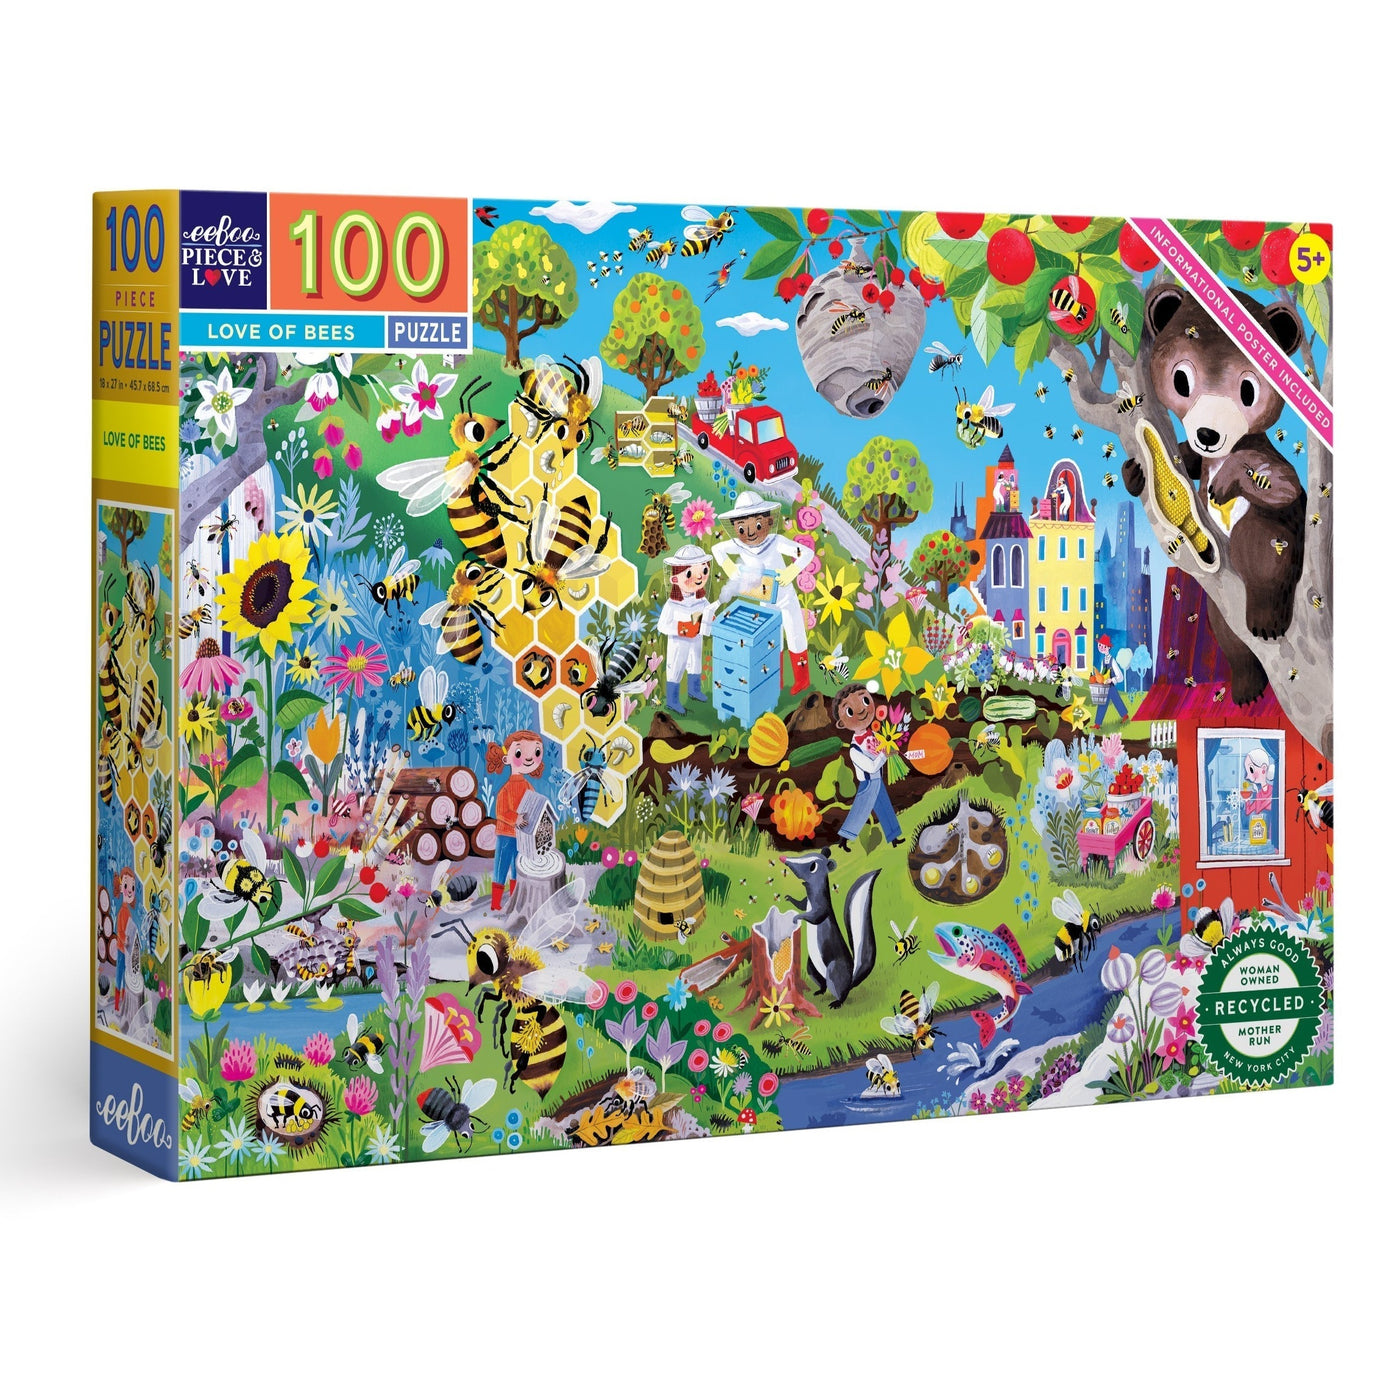 Love of Bees | 100 Piece Jigsaw Puzzle